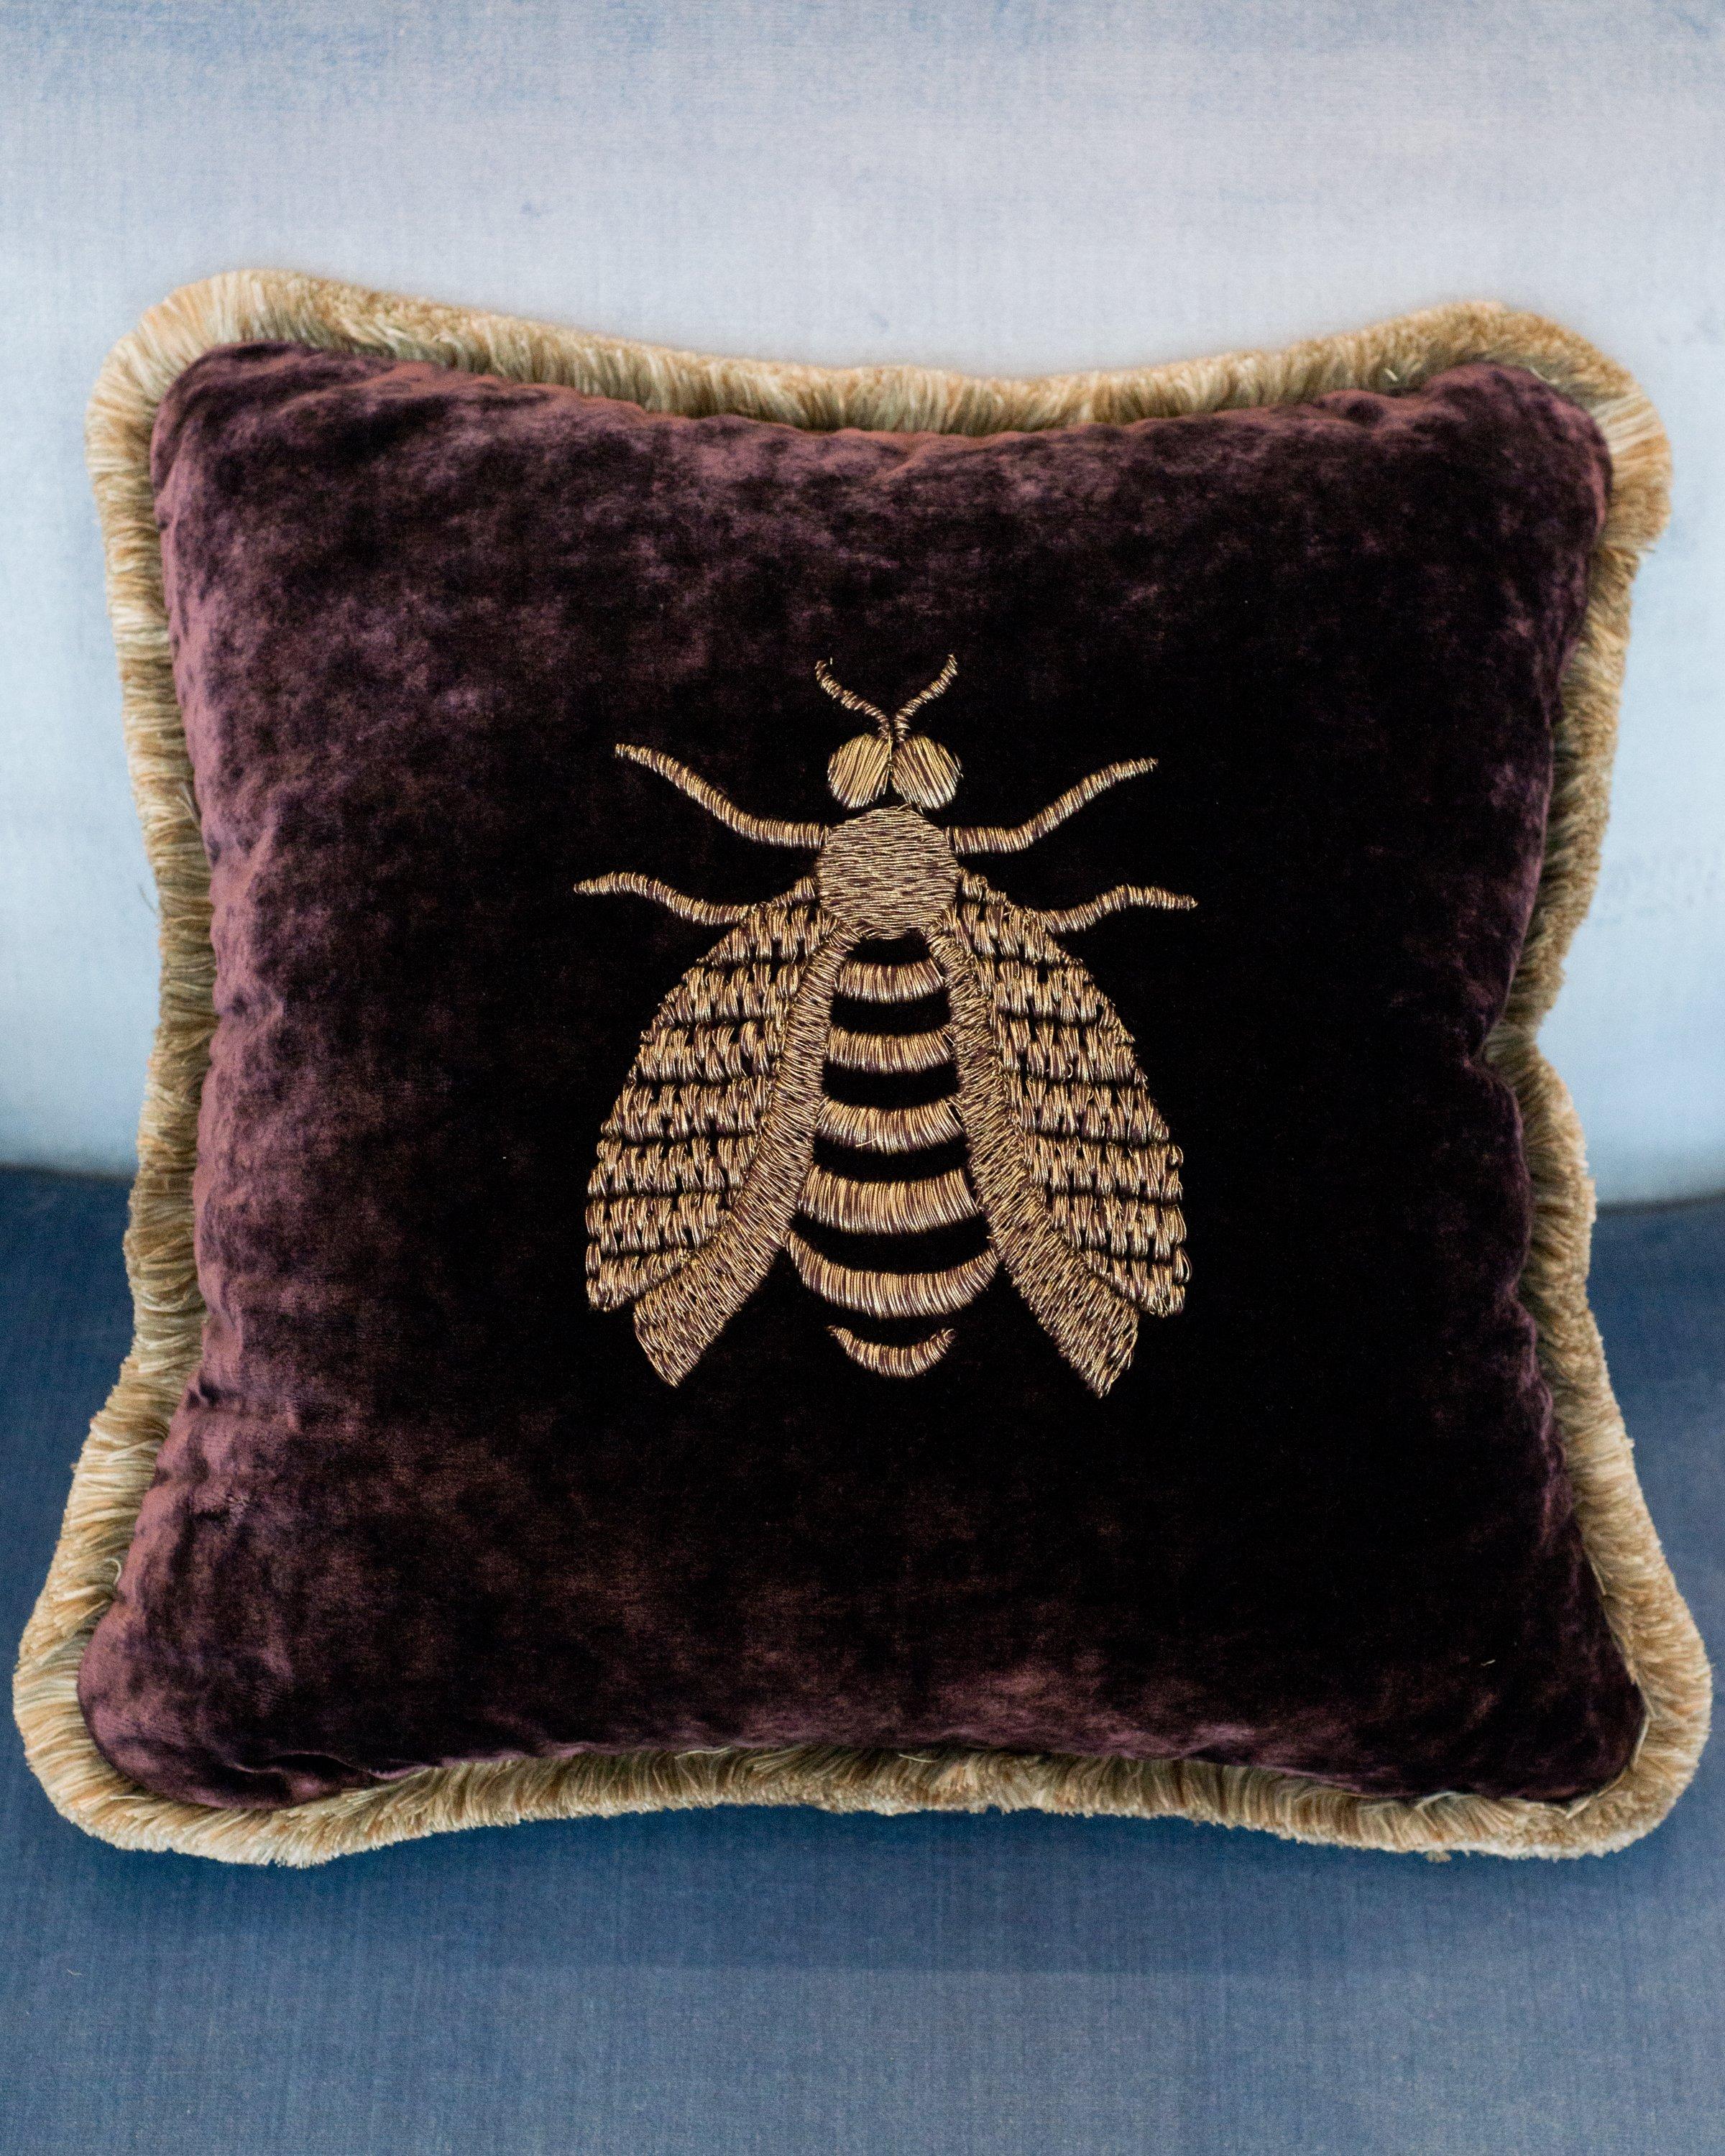 This pair of purple jewel toned, luscious velvet pillows were sourced on travels to Rome. Embroidered with a large Bee motif on the front of each pillow with gold thread. A symbol of royalty, Gucci and Dior are proud to carry the bee as one of their